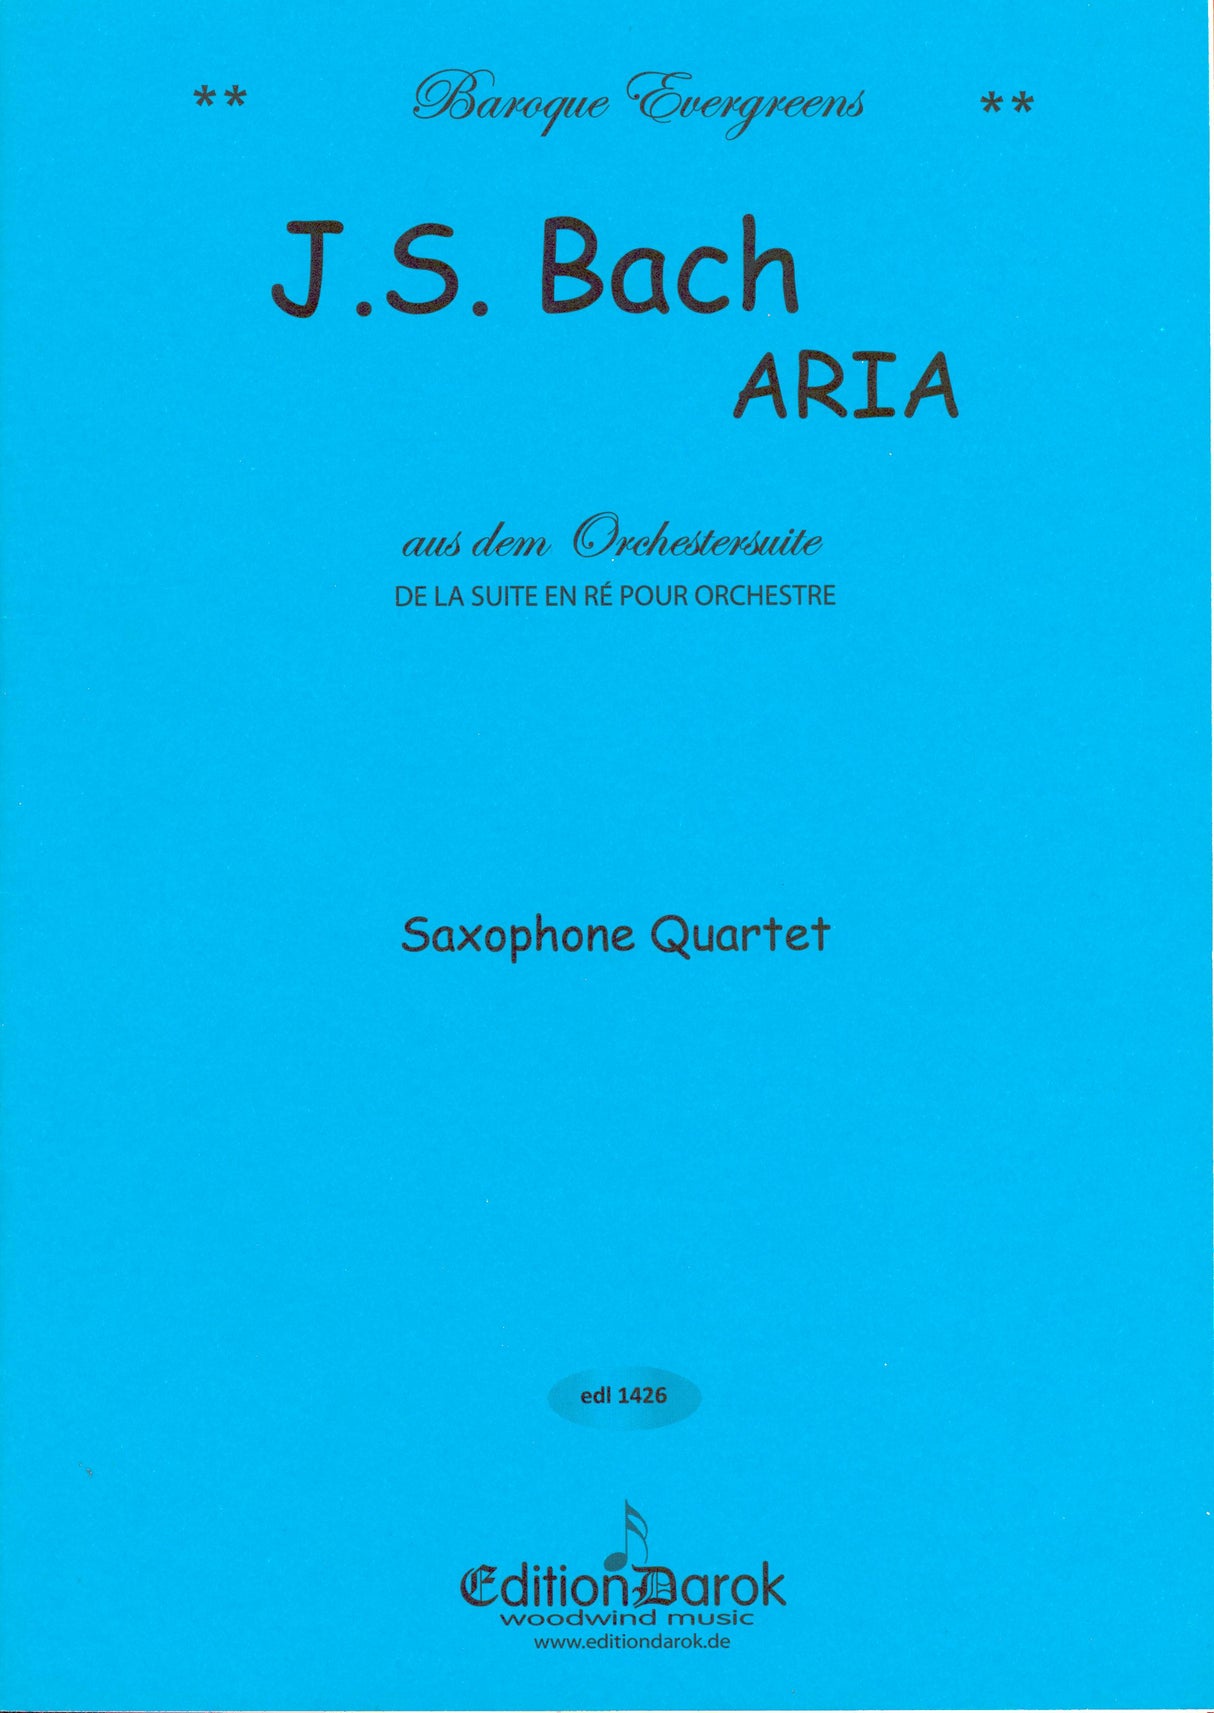 Bach: Aria from Orchestral Suite No. 3 in D Major (arr. sax quartet)